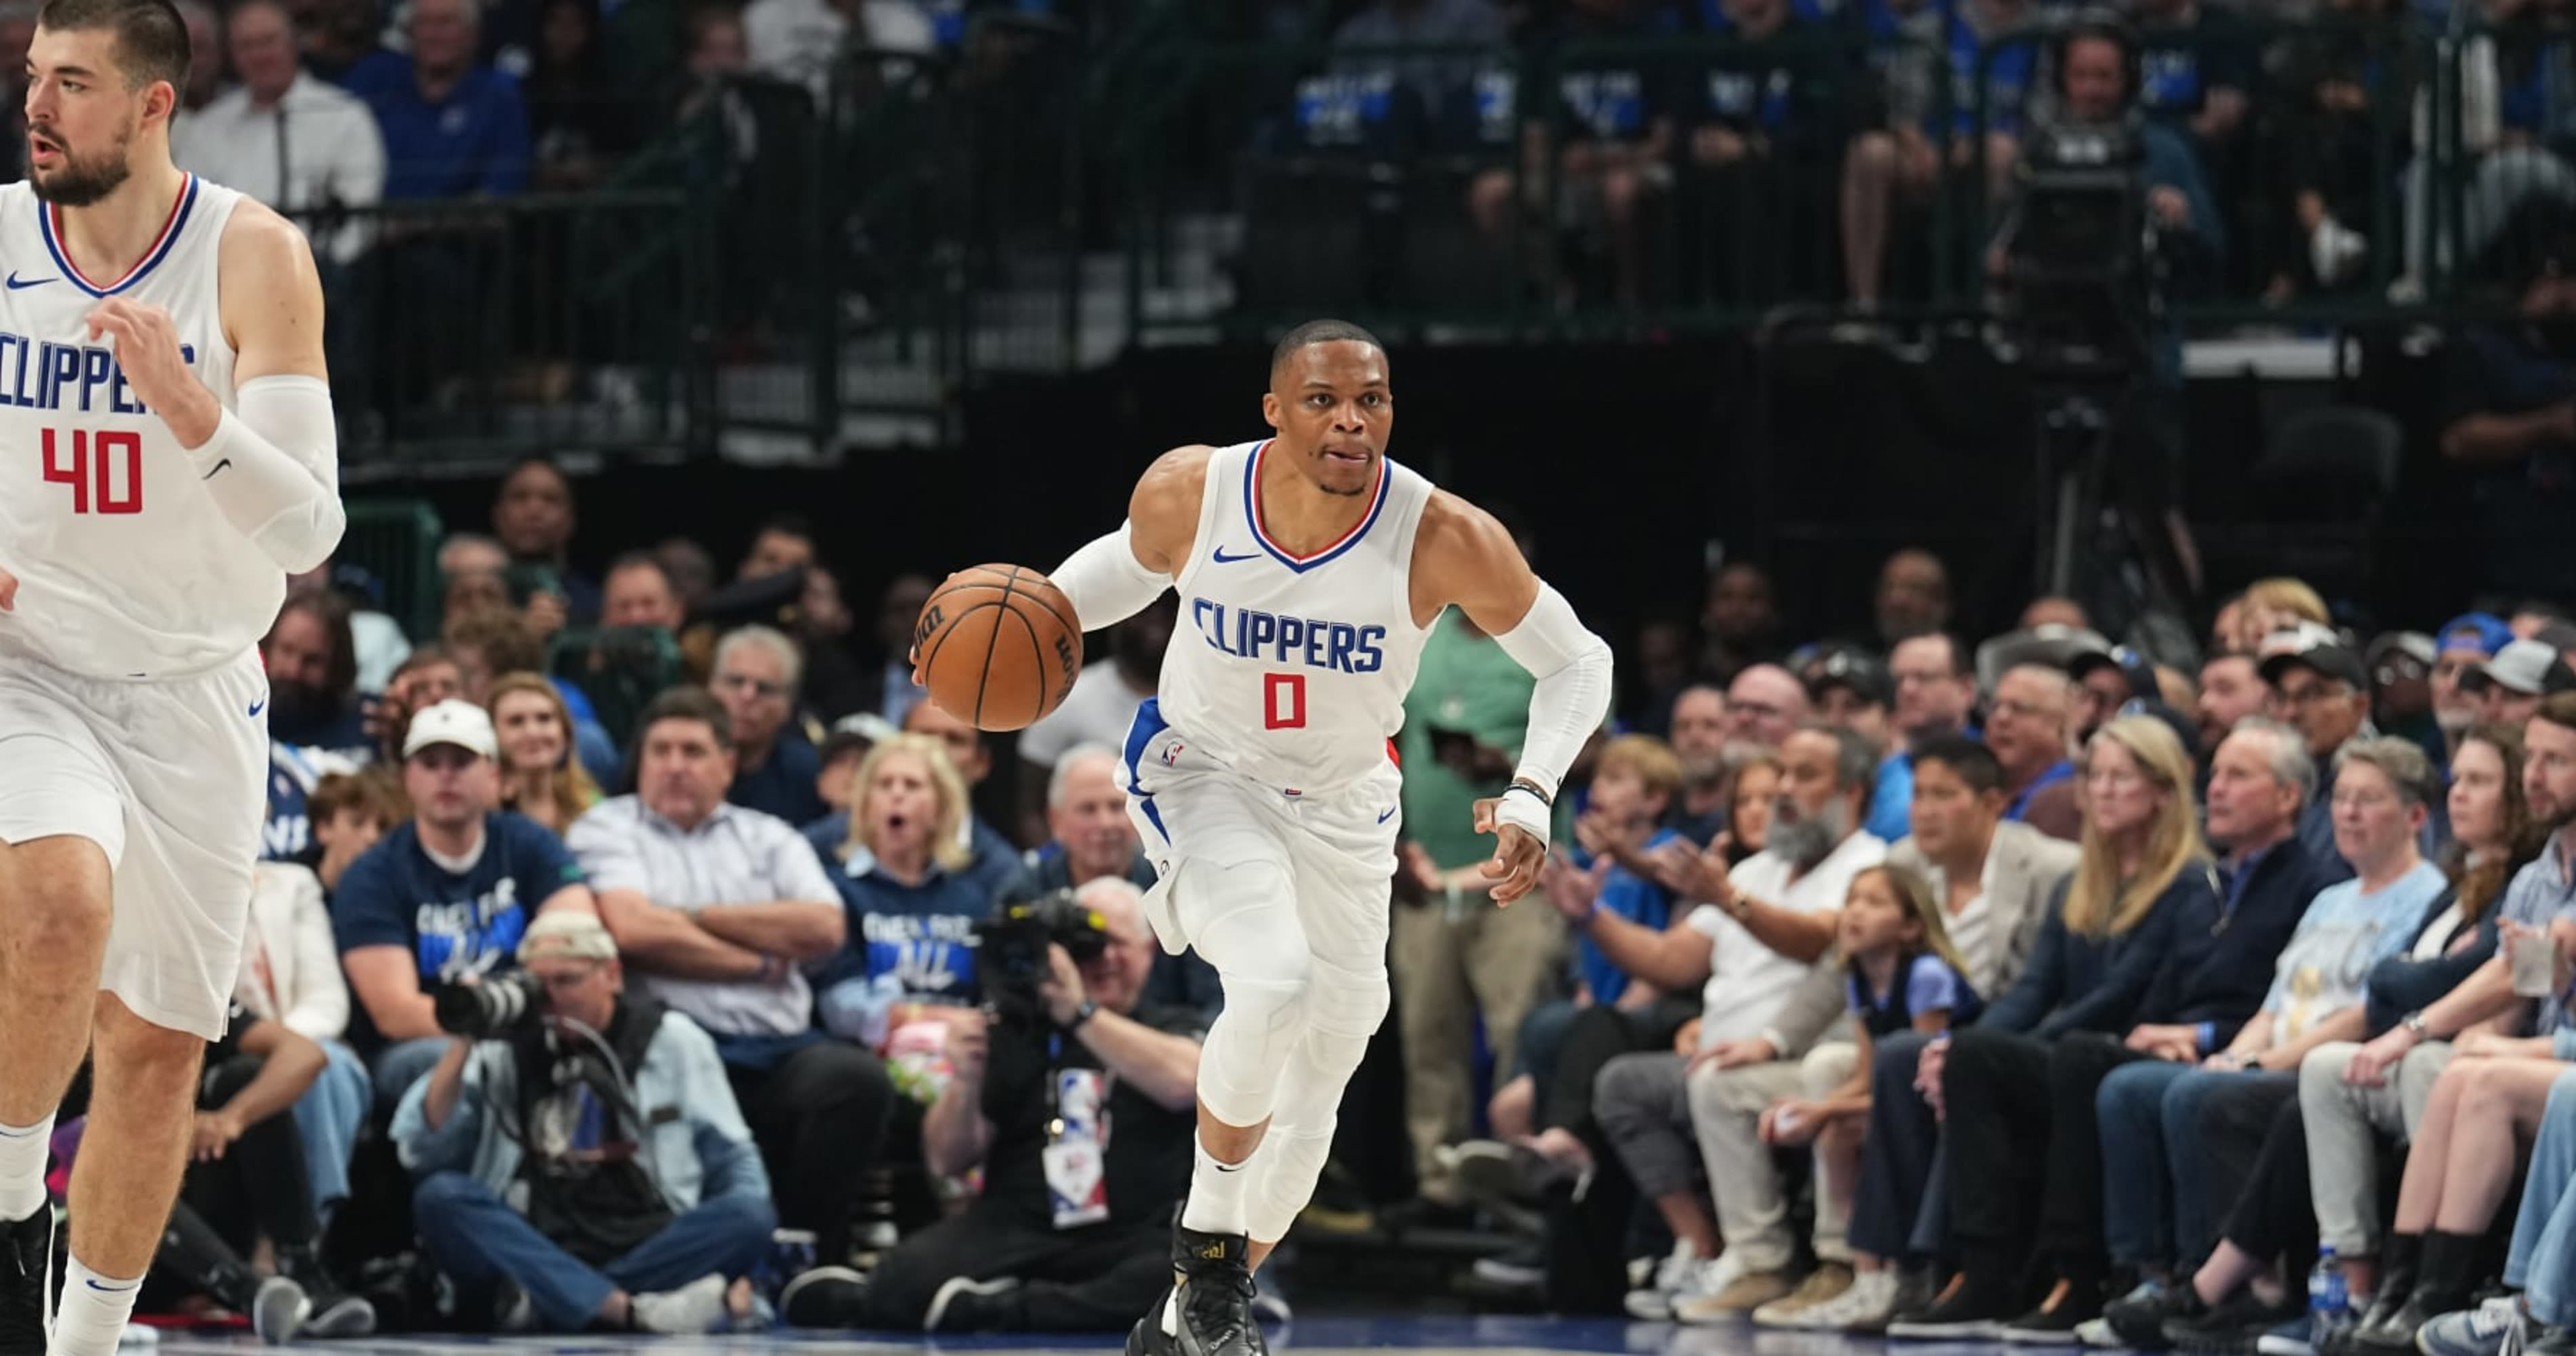 NBA Fans Troll Clippers' Russell Westbrook After Ejection with Mavs' P.J. Washington